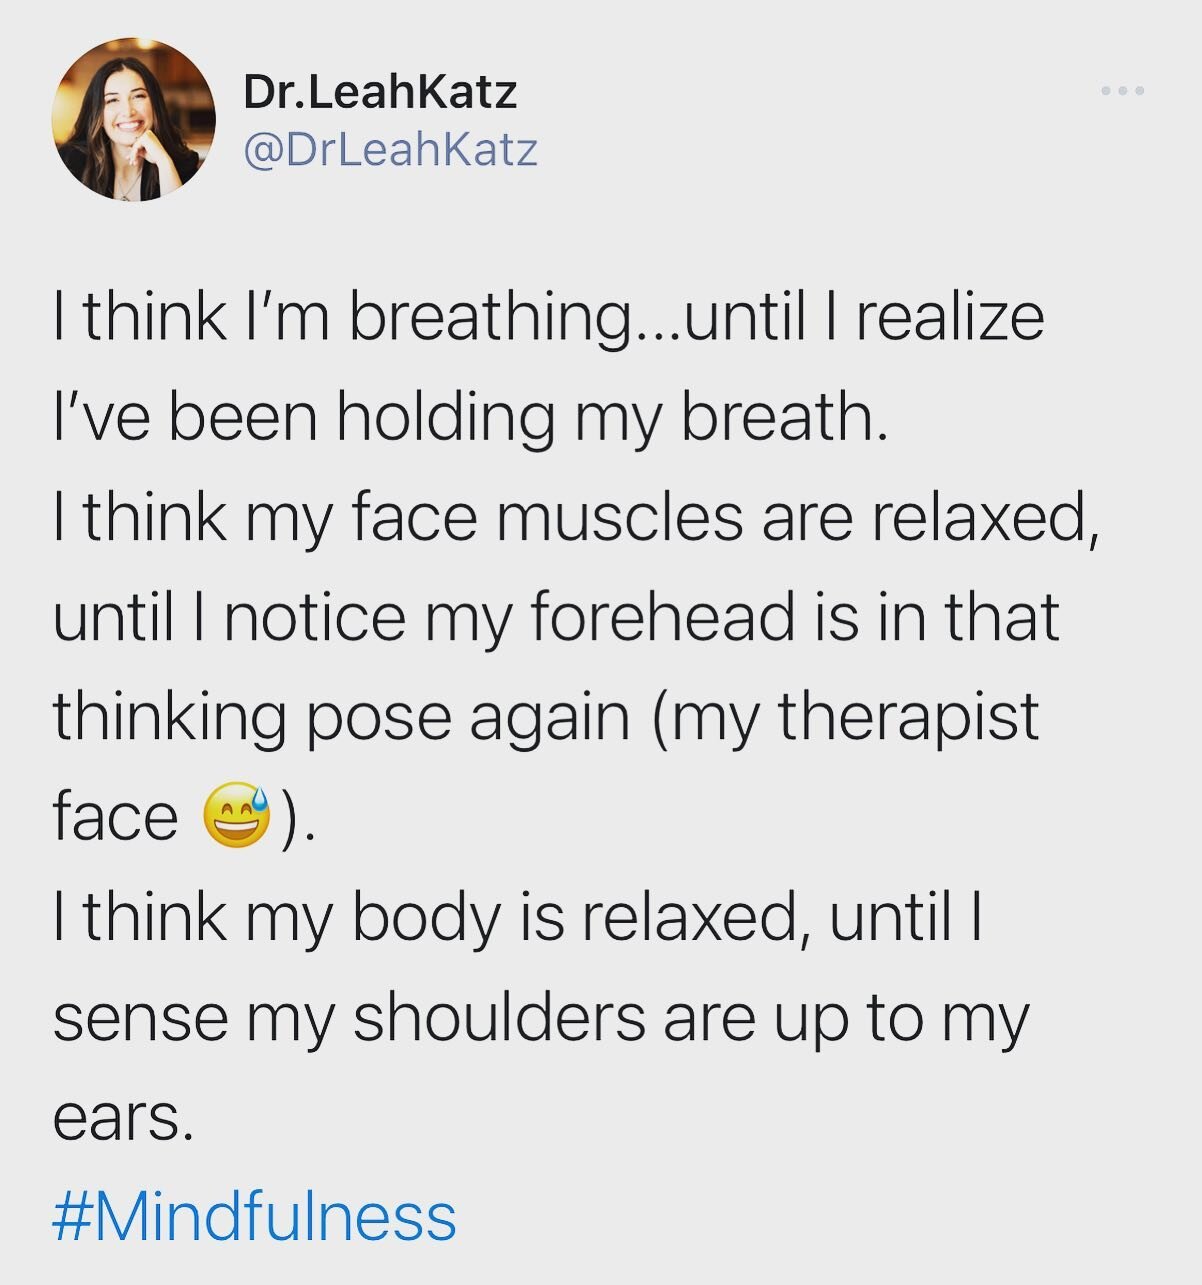 Just a little bit of mindfulness. Doing a quick body scan can be so helpful in connecting with our bodies in a nurturing way, noticing any tension we are carrying, and releasing it if we can. I typically find tension in my shoulders, jaw, forehead.
.